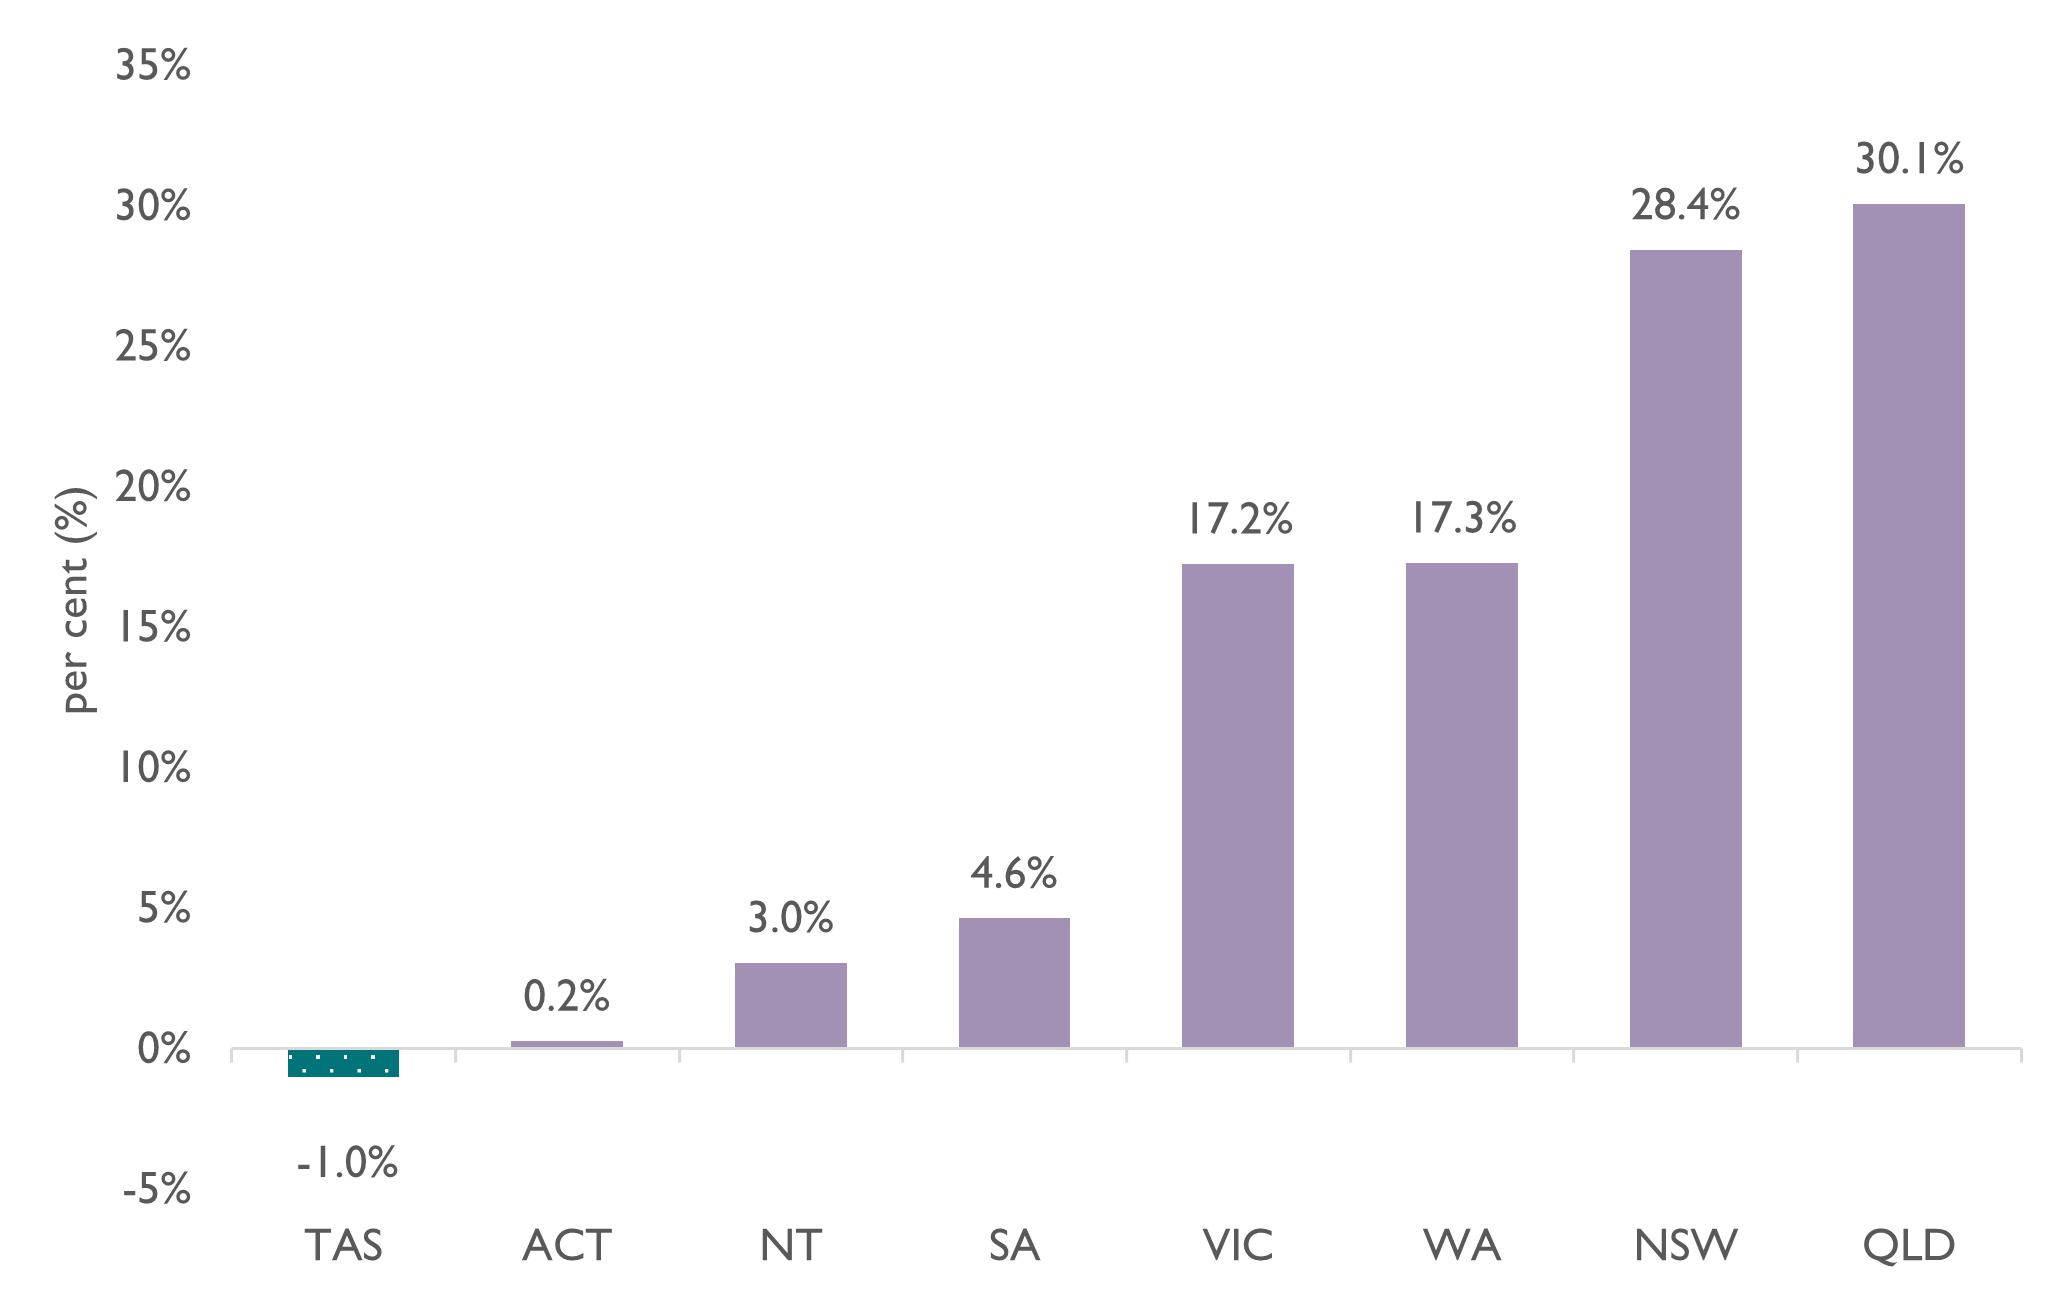 This figure is a bar chart showing that in 2021 Tasmania contributed to reducing Australia's total emissions, contributing minus 1.0 per cent. Other state and territory contributions were: ACT (0.2 per cent), NT (3.0 per cent), SA (4.6 per cent), VIC (17.2 per cent), WA (17.3 per cent), NSW (28.4 per cent), and QLD (30.1 per cent).